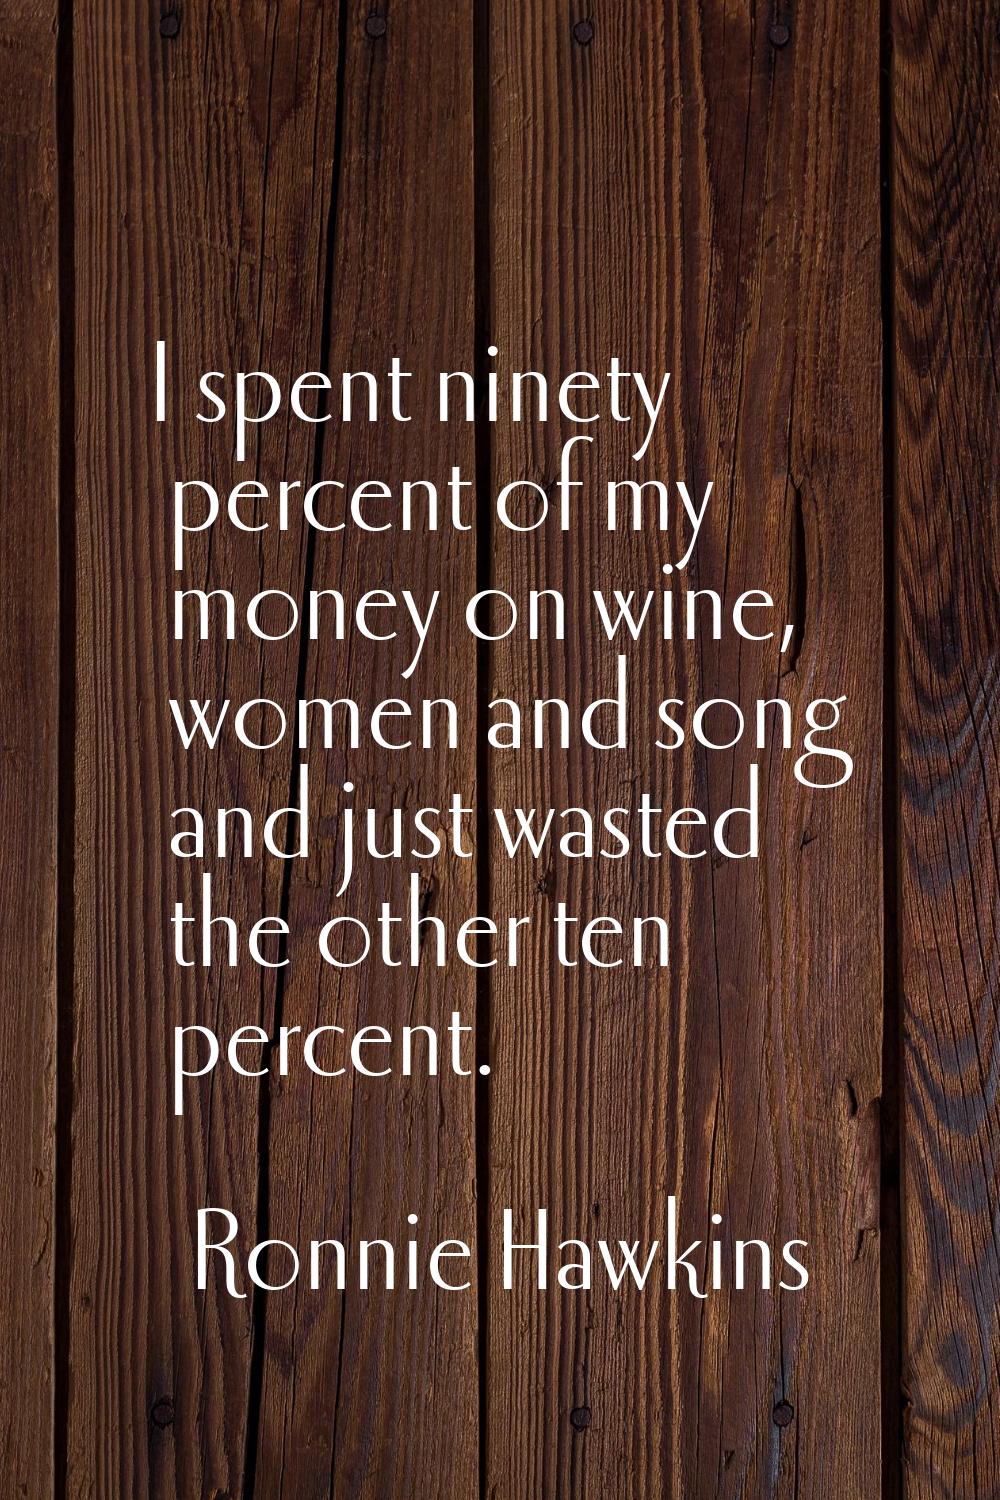 I spent ninety percent of my money on wine, women and song and just wasted the other ten percent.